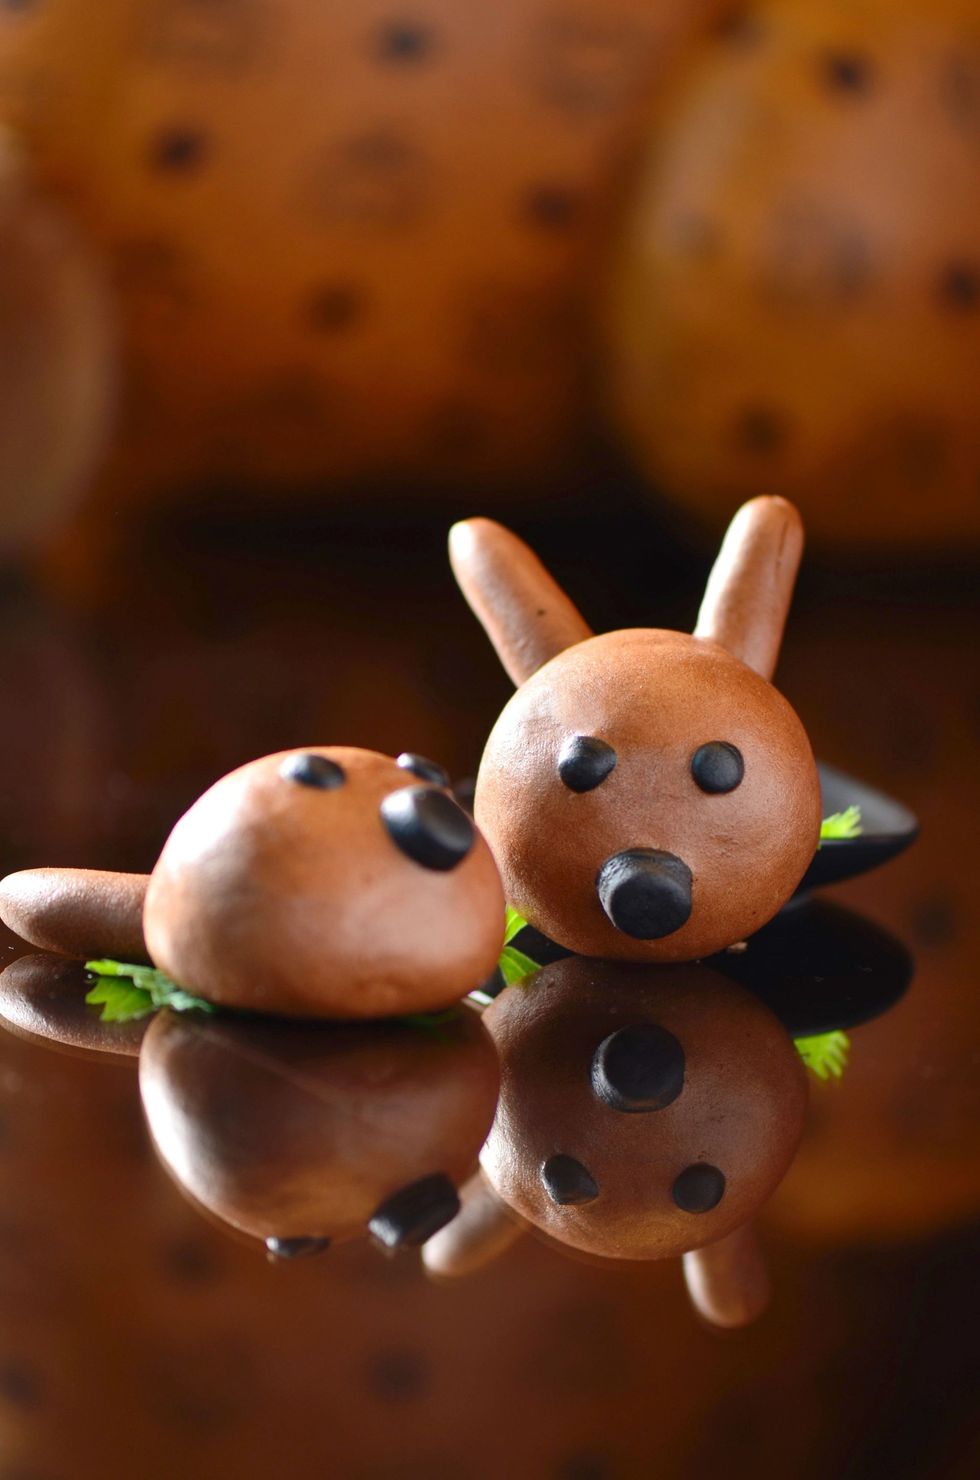 Snout, Toy, Fawn, Figurine, Animation, Wood, Still life photography, Still life, Clay, Food, 